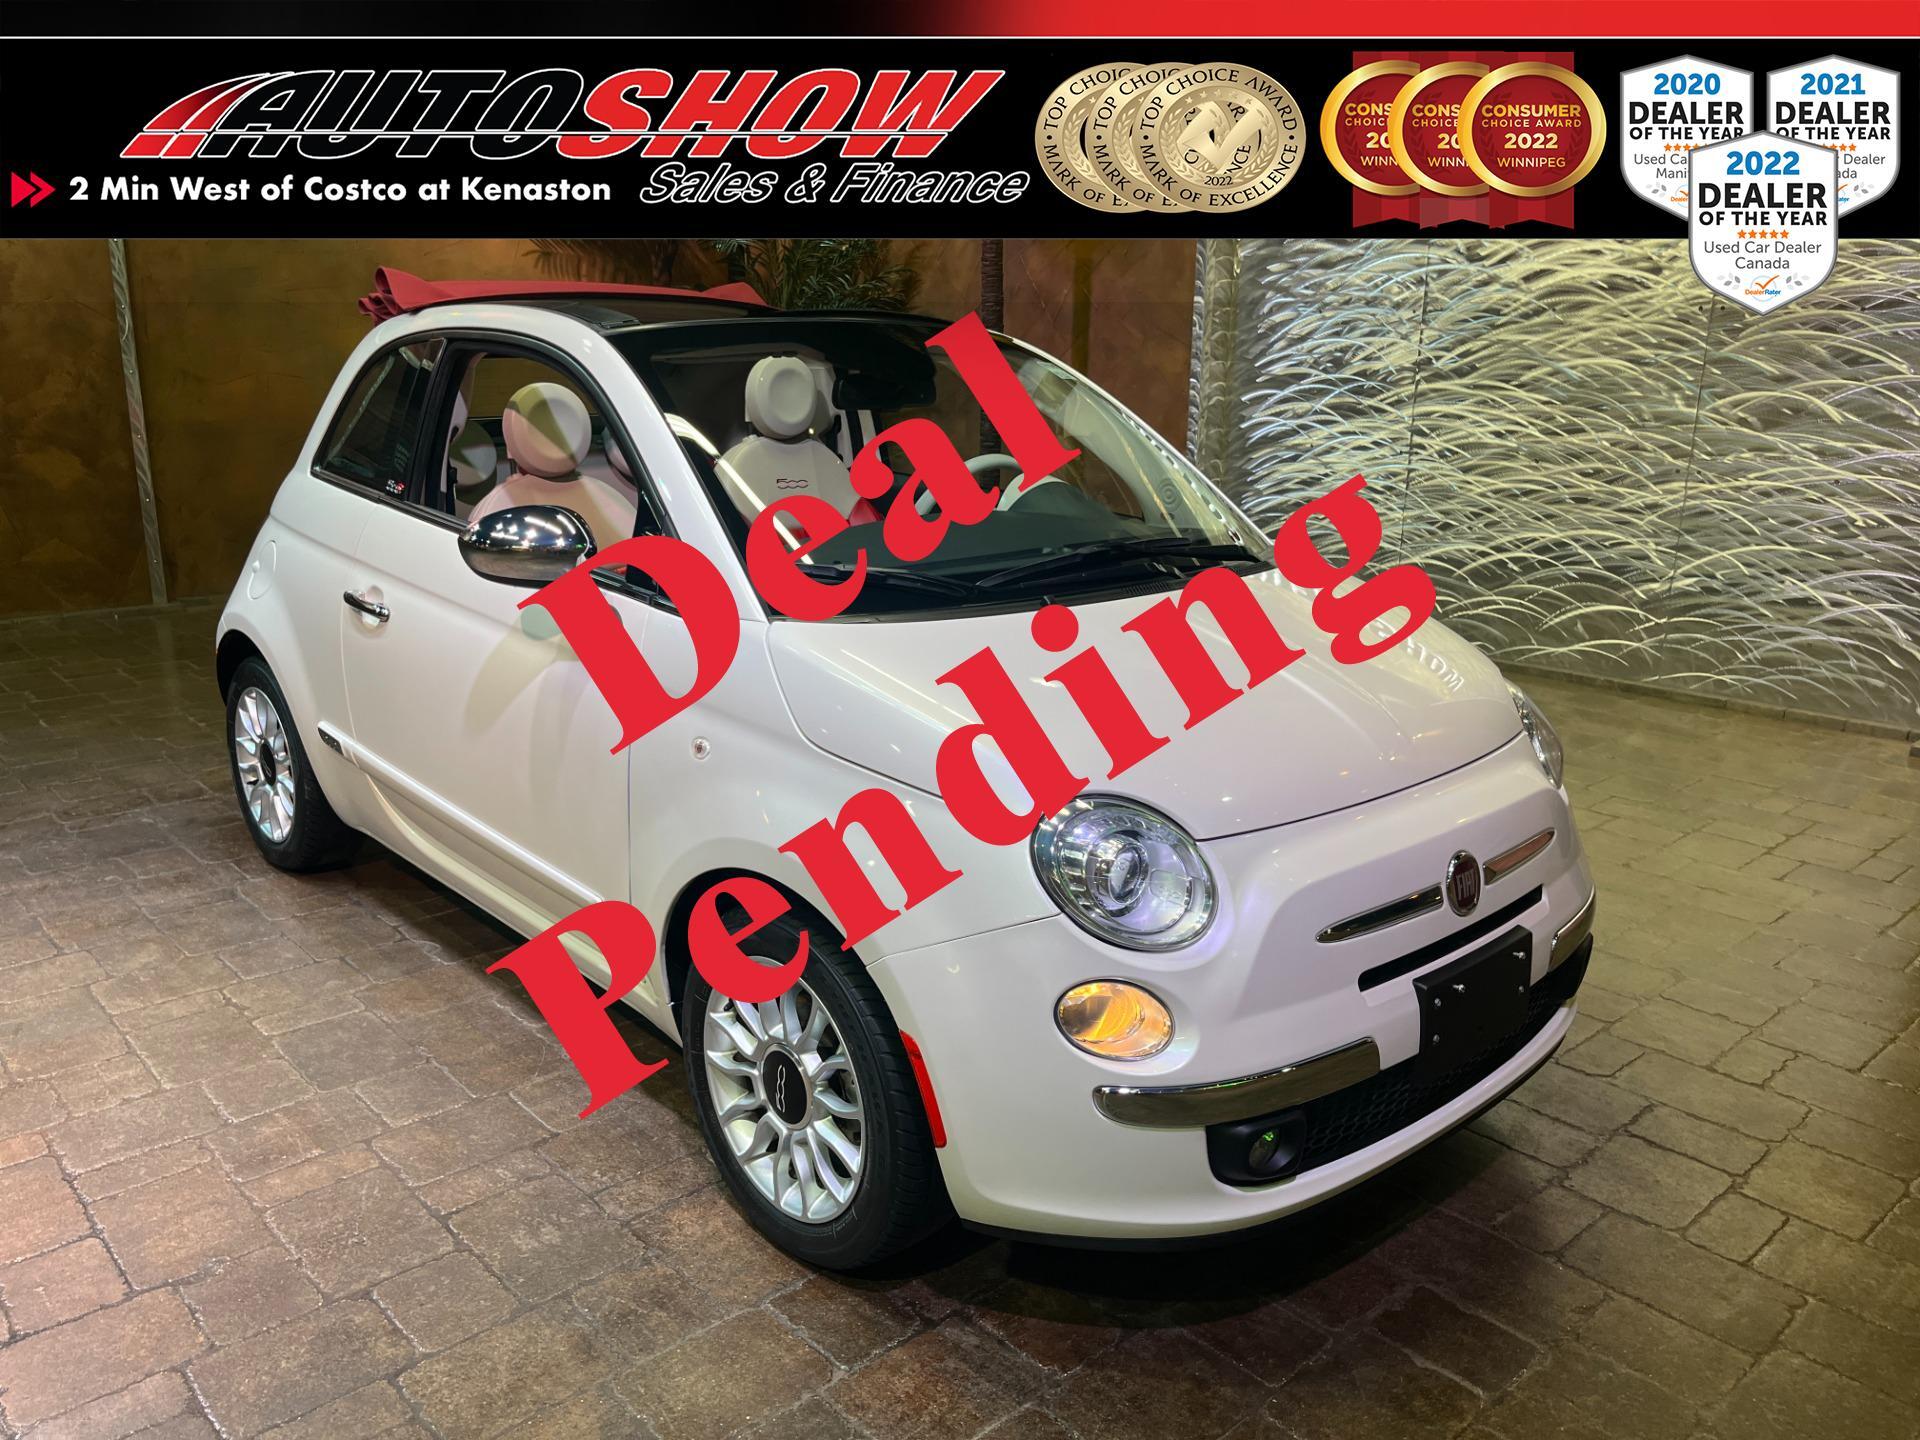 2014 Fiat 500C Lounge Convertible M/T - Red/White Htd Lthr